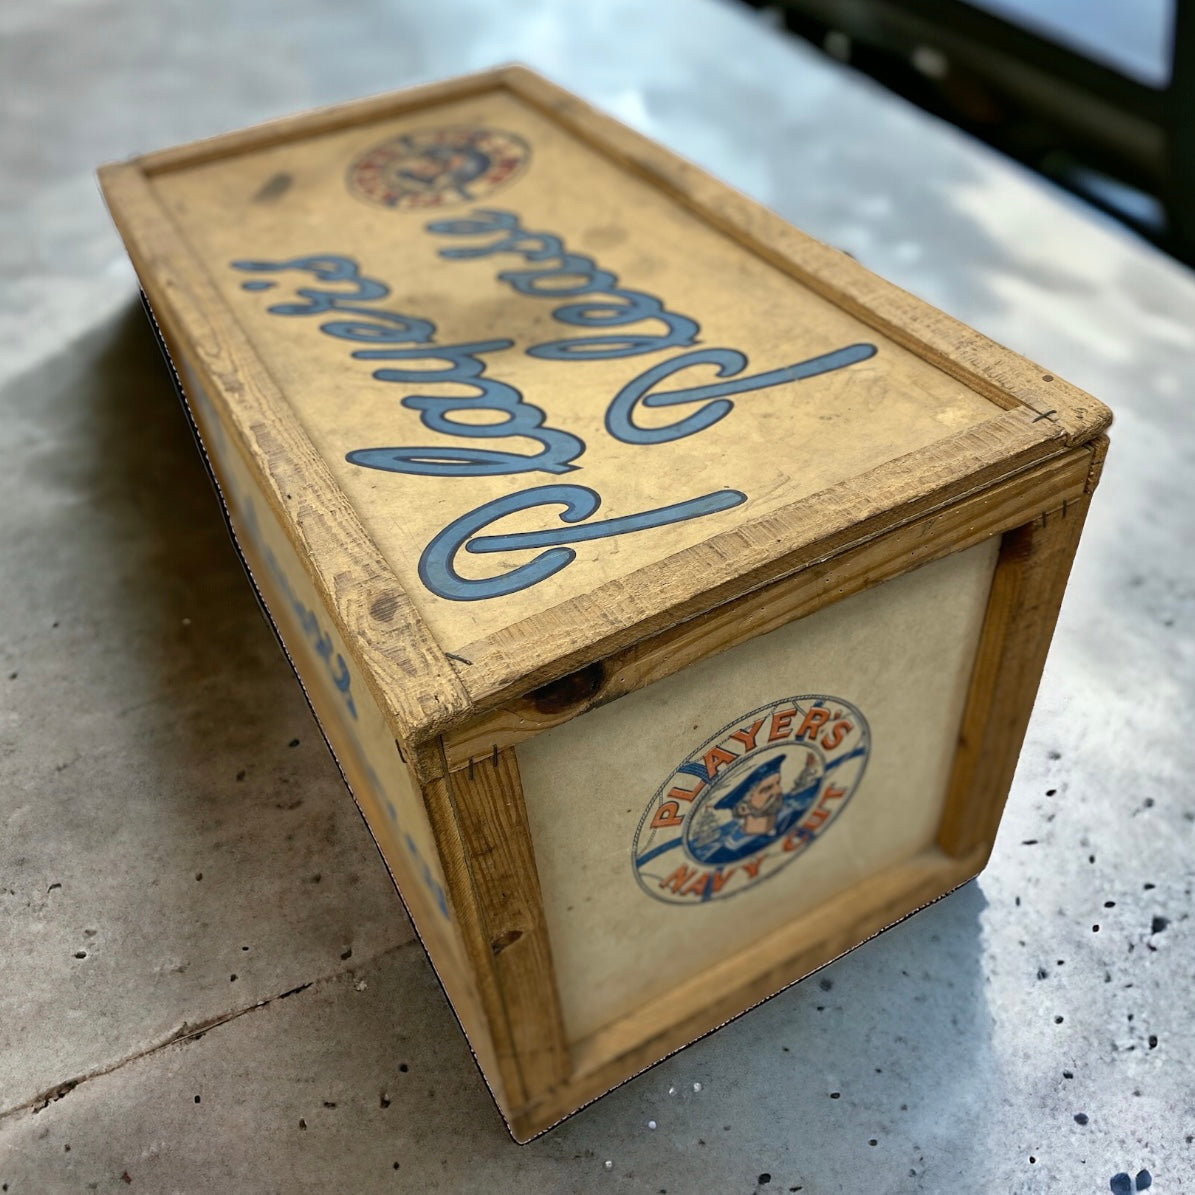 RoomSet Original Players Navy Cut Tobacco Crate